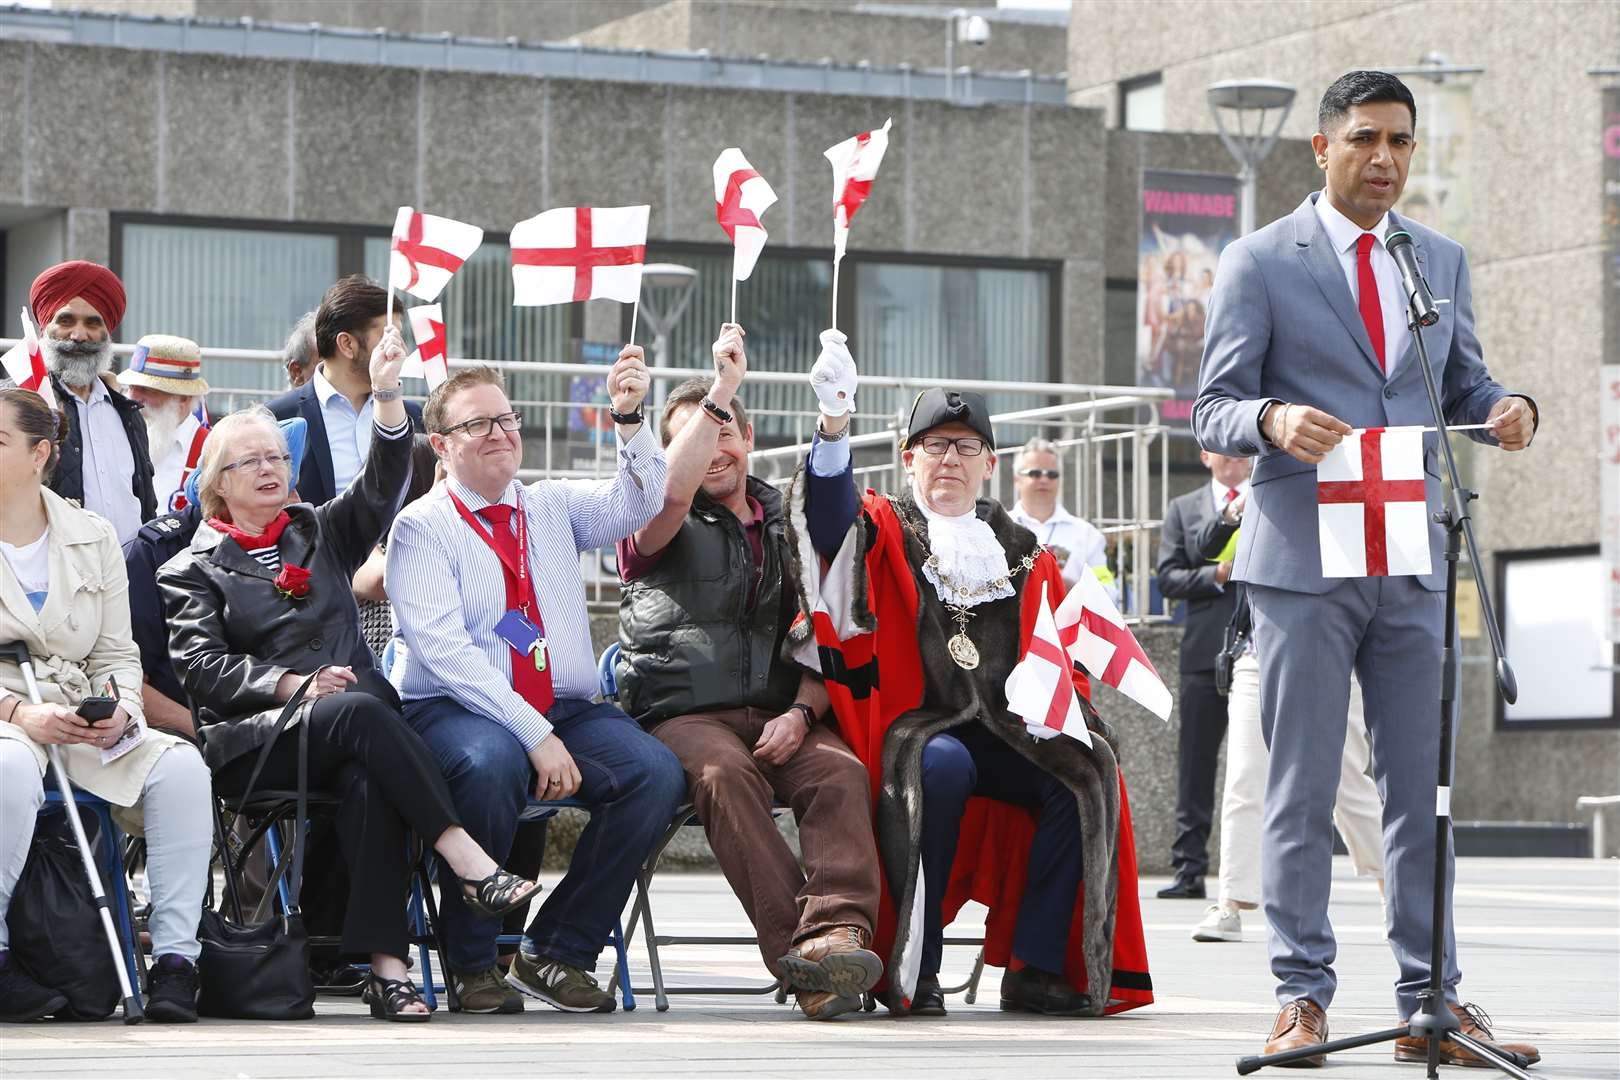 Gurvinder Sandher, artistic director at Cohesion Plus, speaks at the St George's Day parade in Gravesend